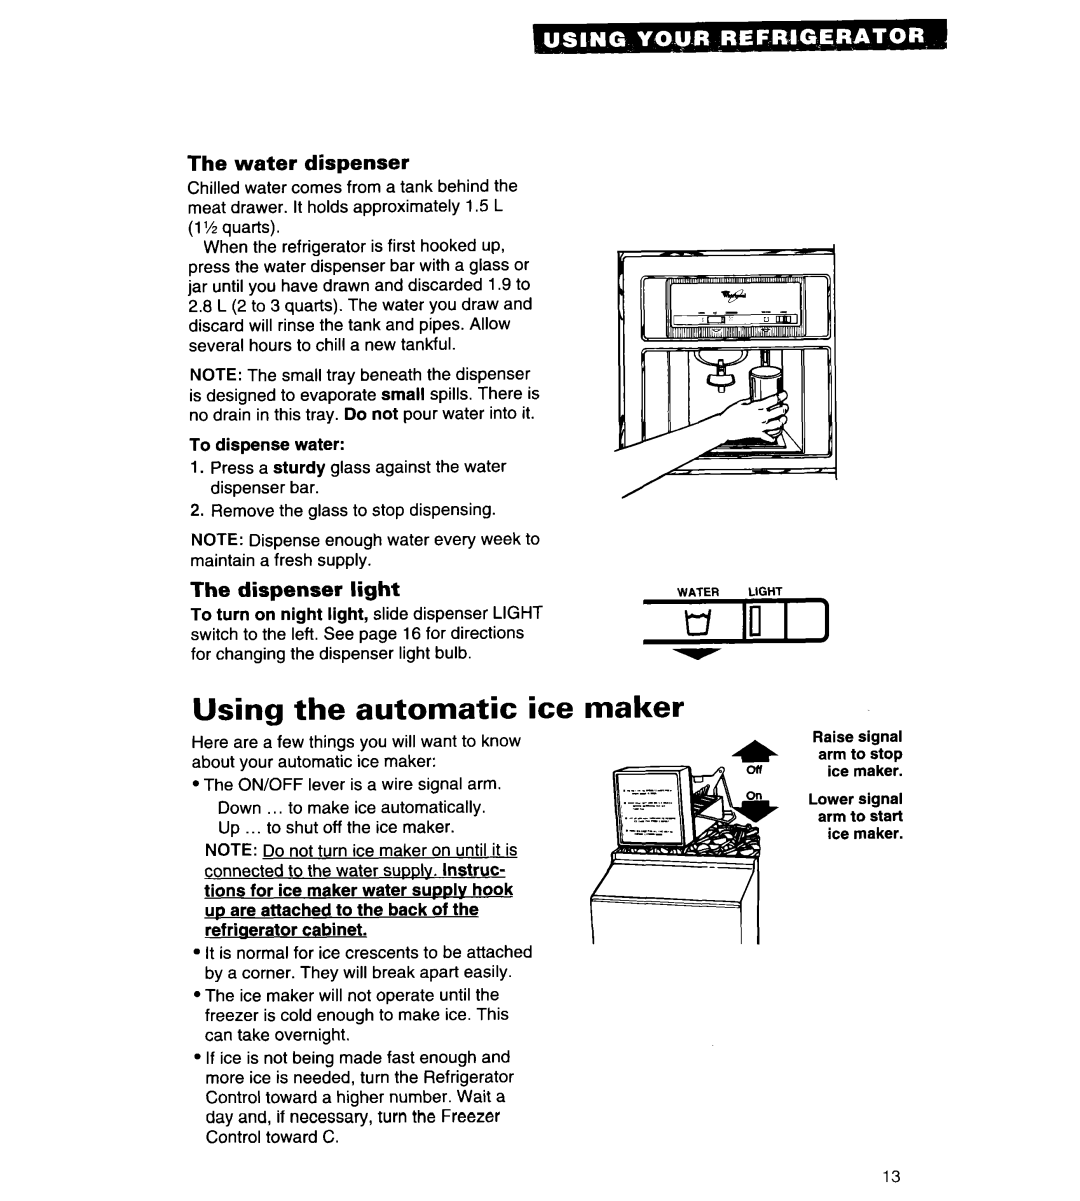 Whirlpool 4ED25DQ important safety instructions Using the automatic ice maker, The water dispenser, The dispenser, light 